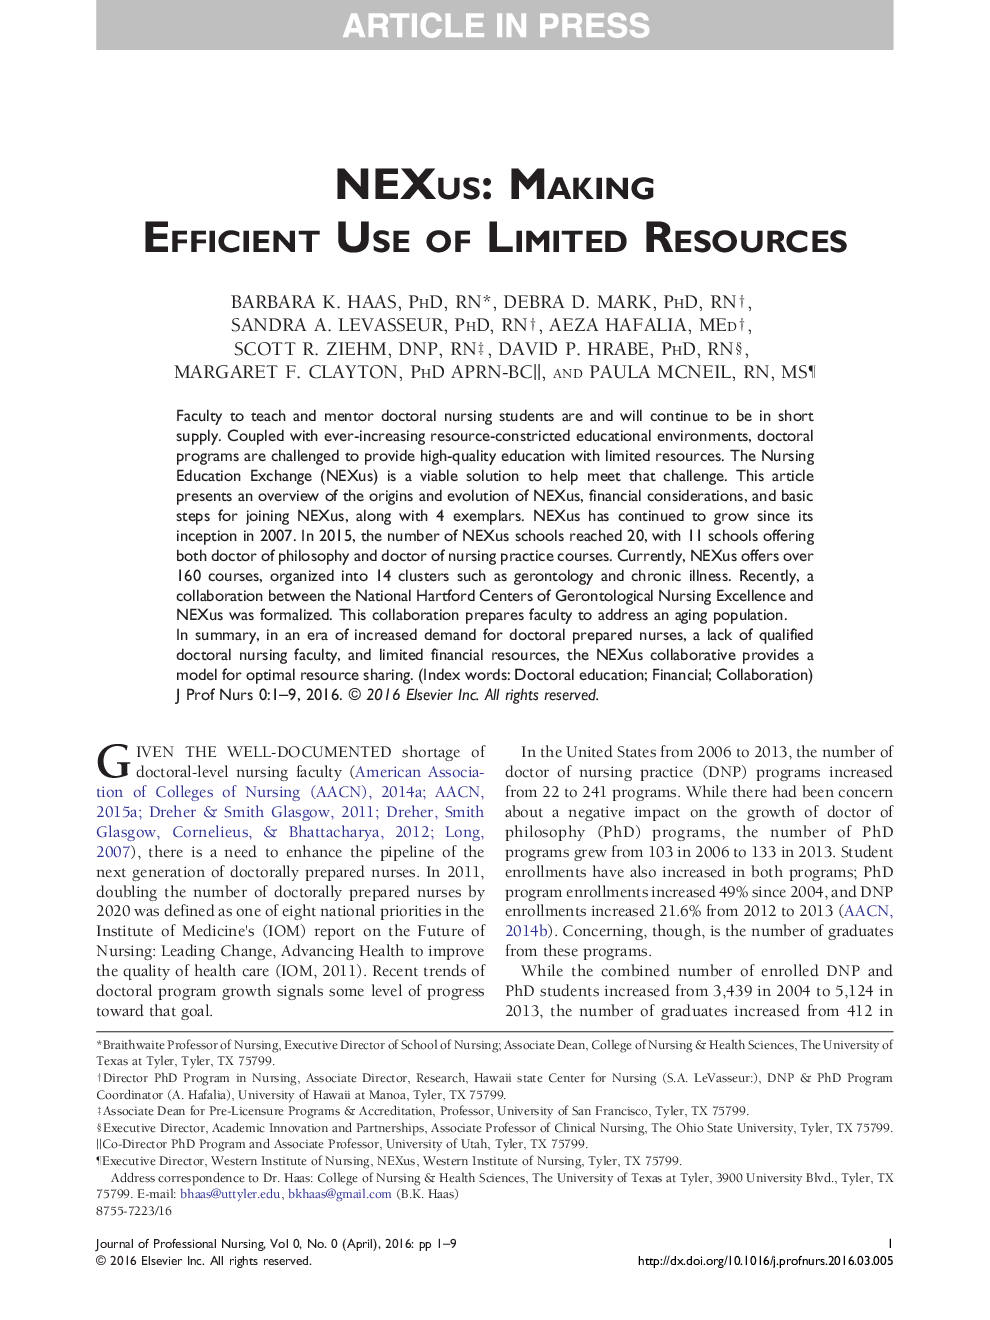 NEXus: Making Efficient Use of Limited Resources